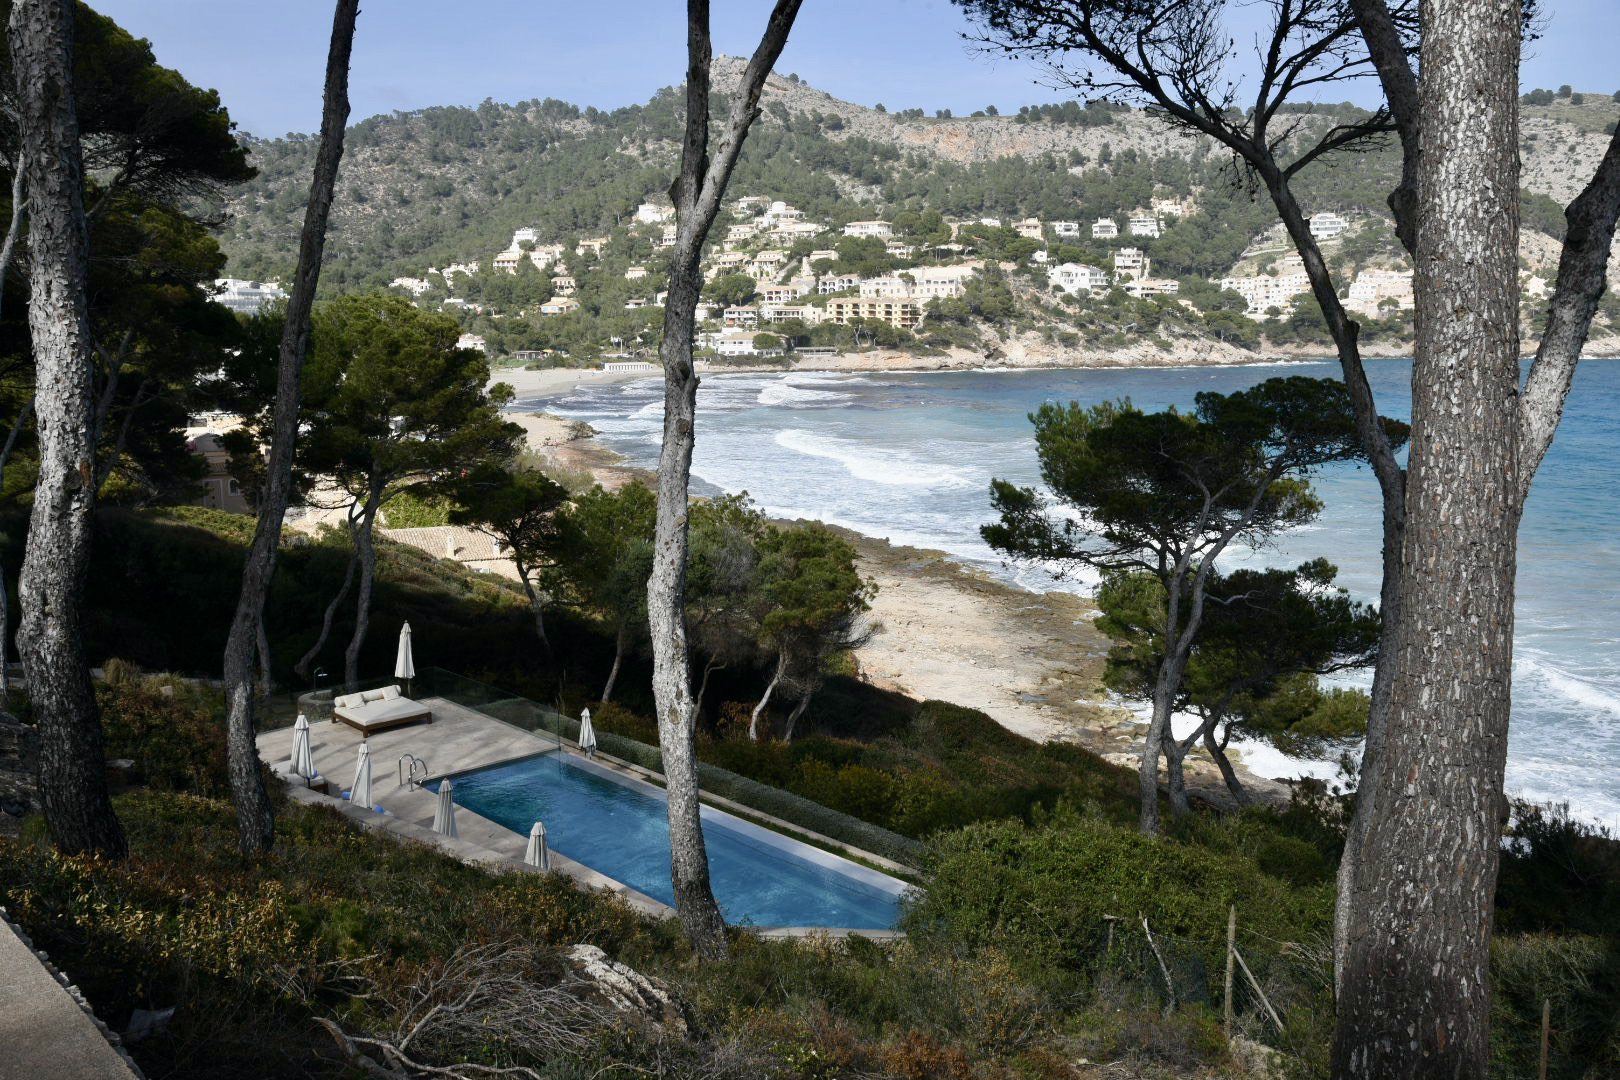 Hotel Can Simoneta - staying & dining in style in Mallorca/Spain